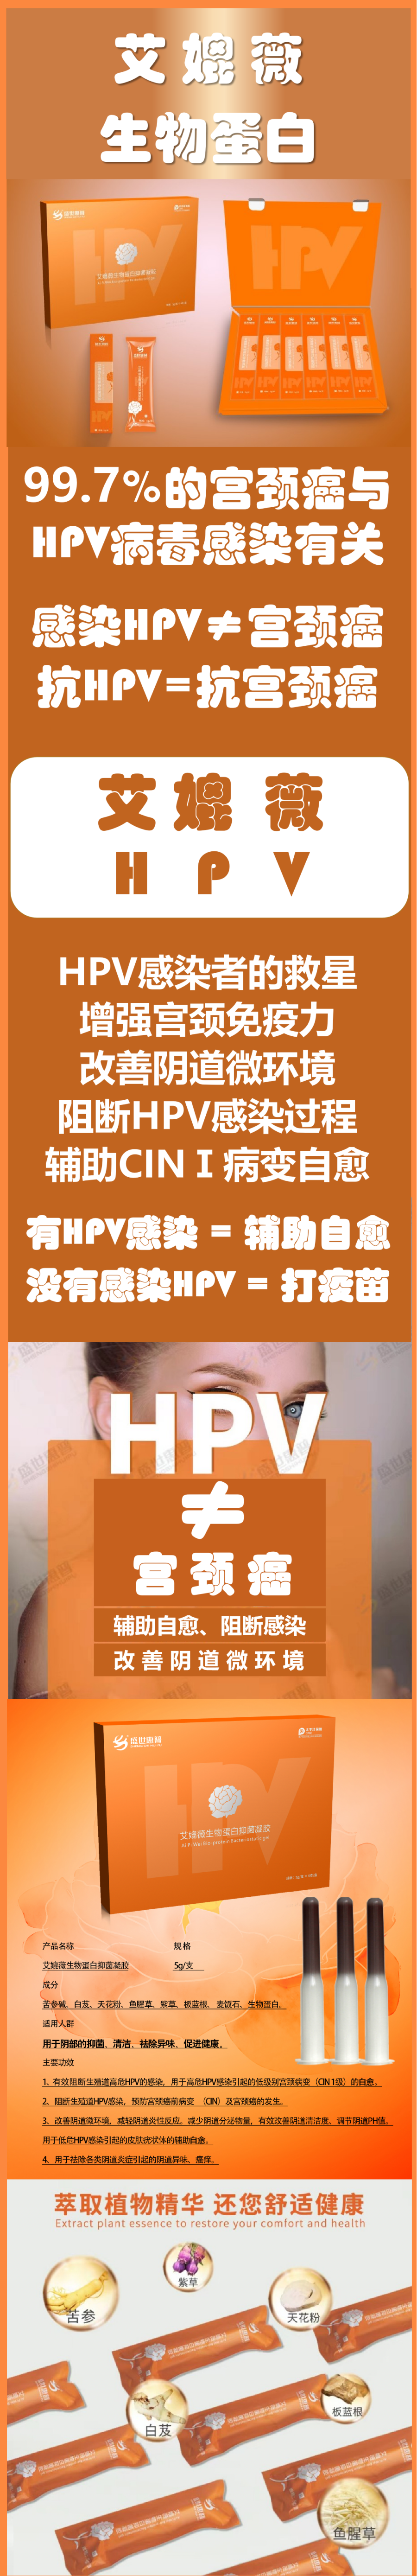 HPV网站1_副本.png